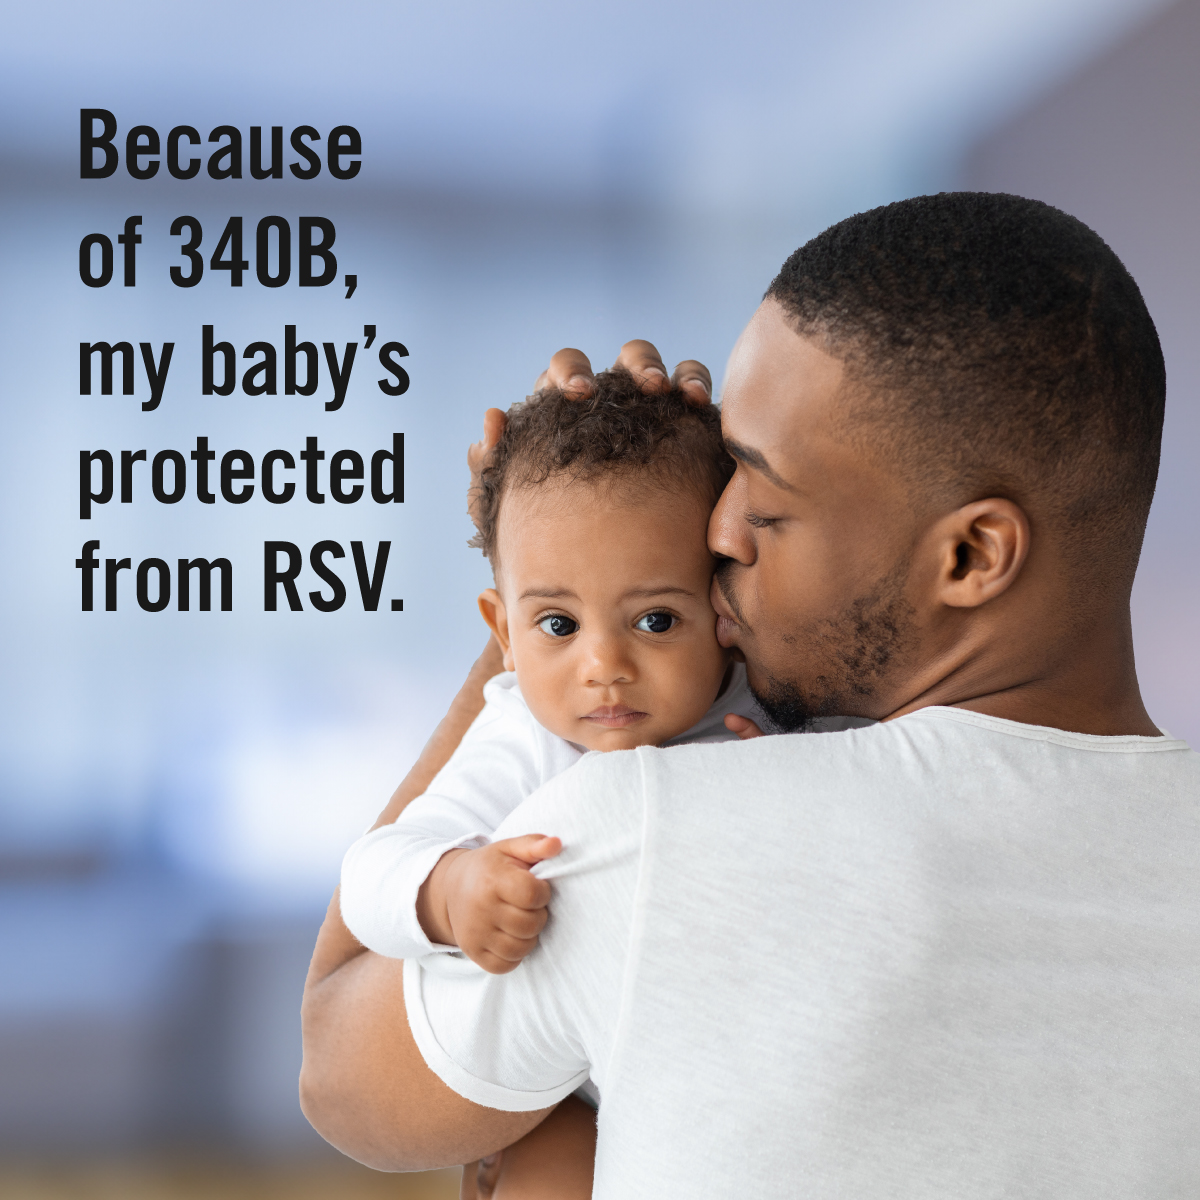 #Becauseof340B, our children are protected from RSV and other health threats because they can receive care when and where they need it. Immunizing children and protecting 340B is crucial for healthy babies and healthy communities. #NIIW